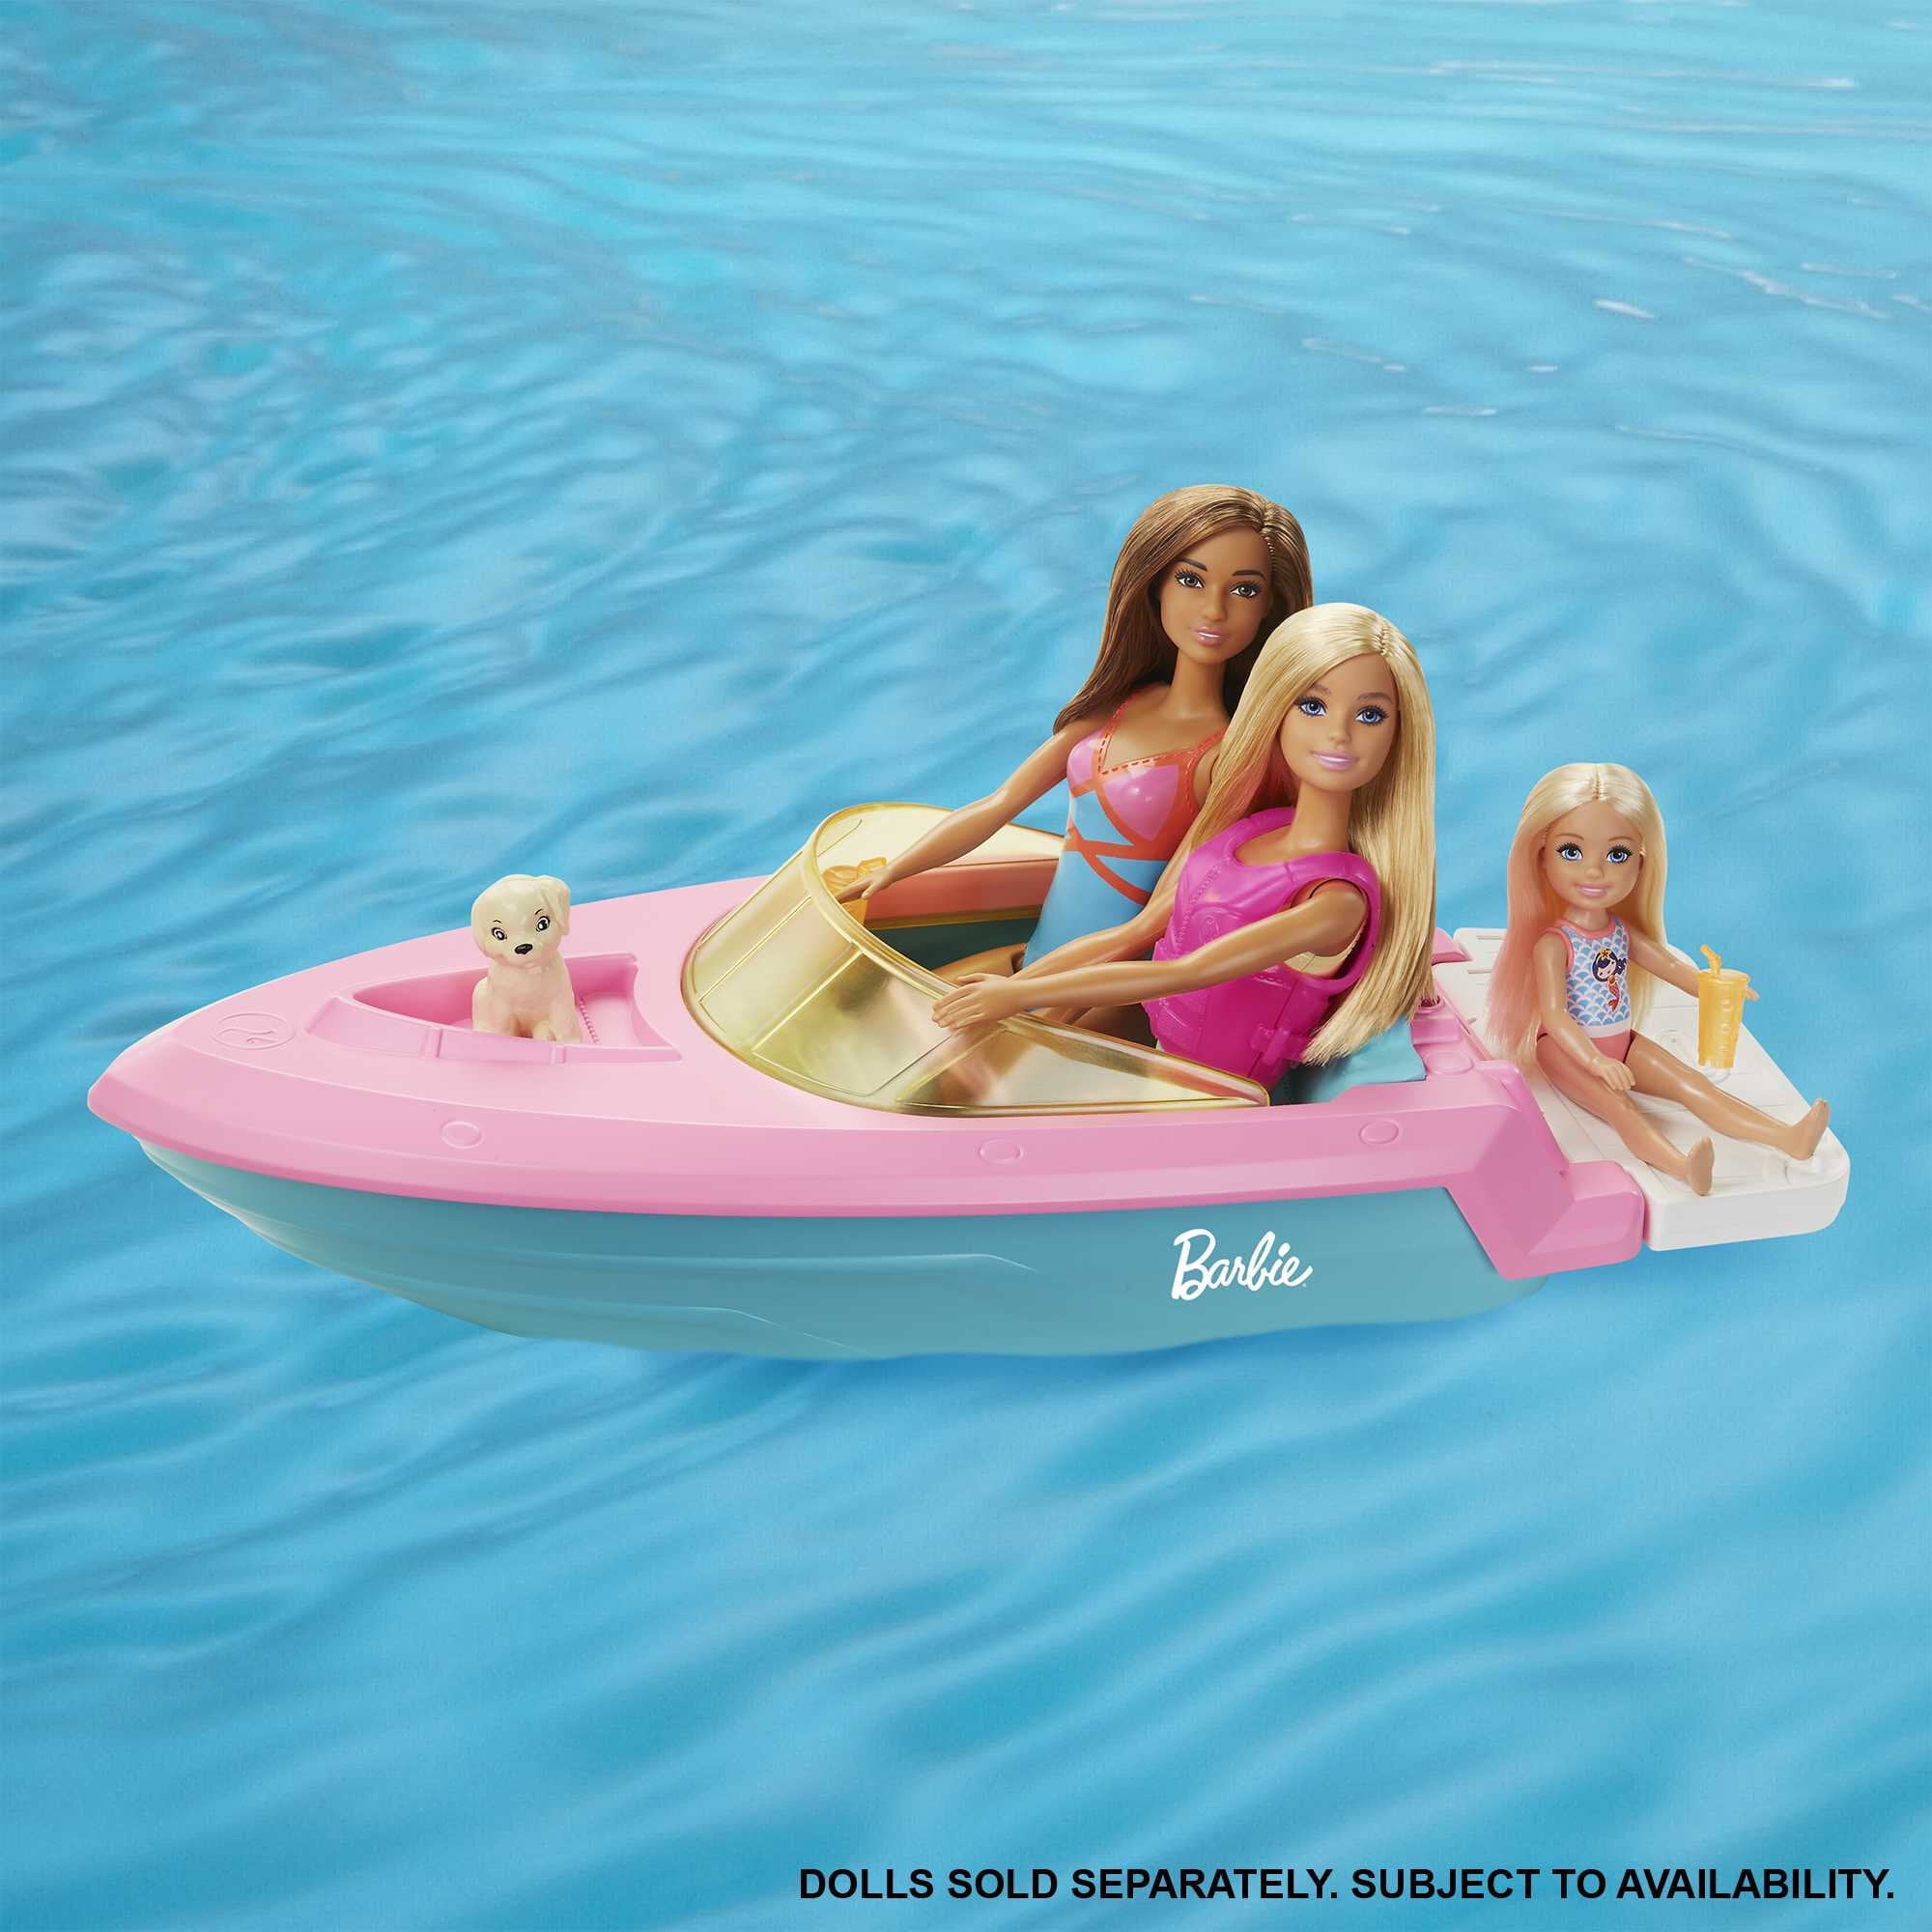 Barbie Toy Boat Set with Puppy, Life Vest and Beverage Accessories